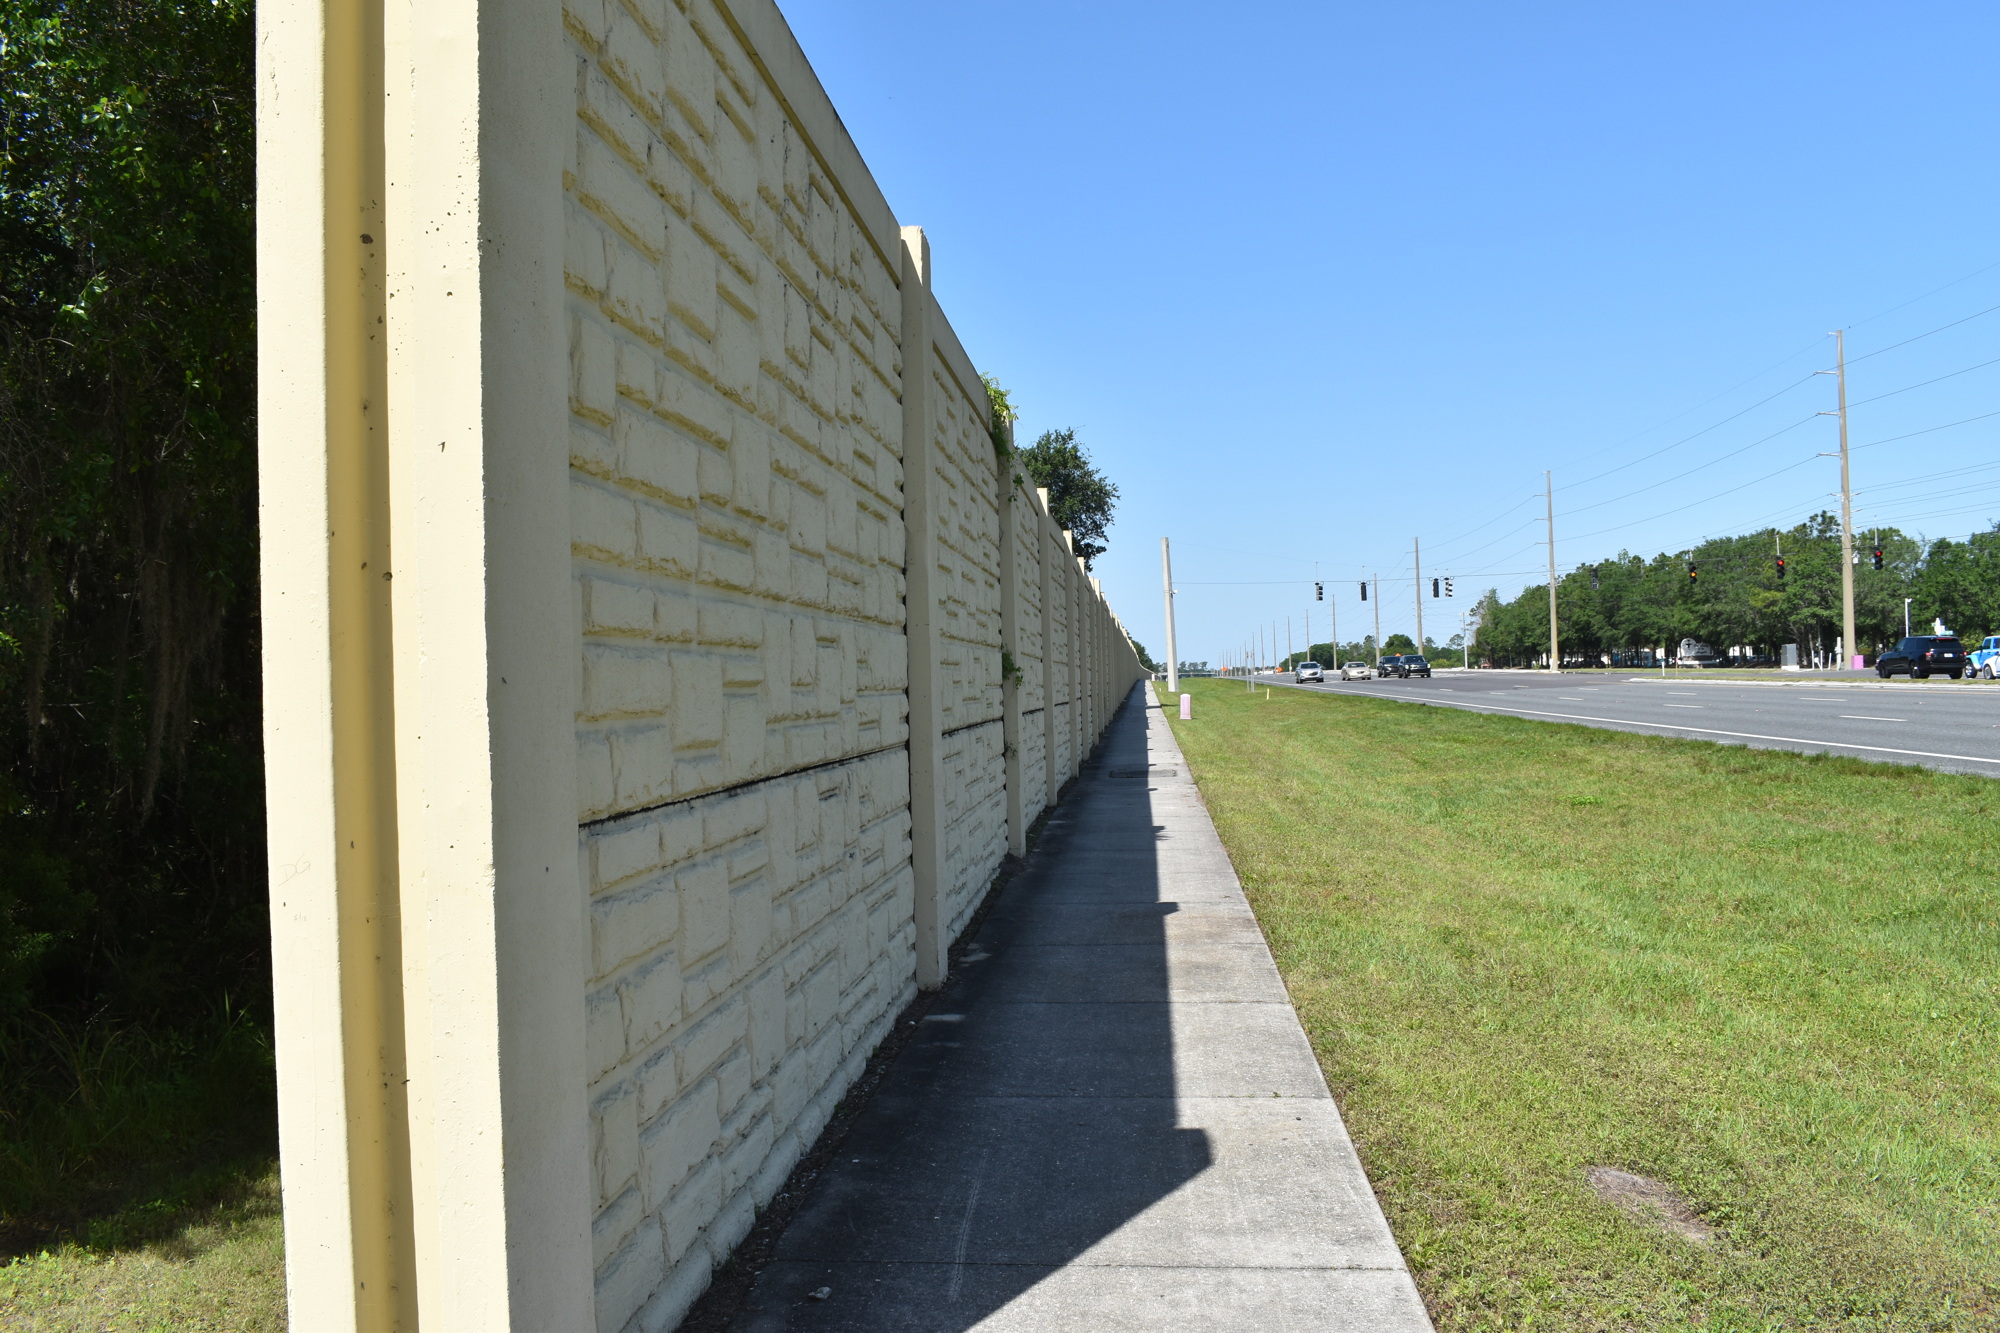 Some Greenbrook residents hope for a sound wall like the one alongside the community of Summerfield nearby.